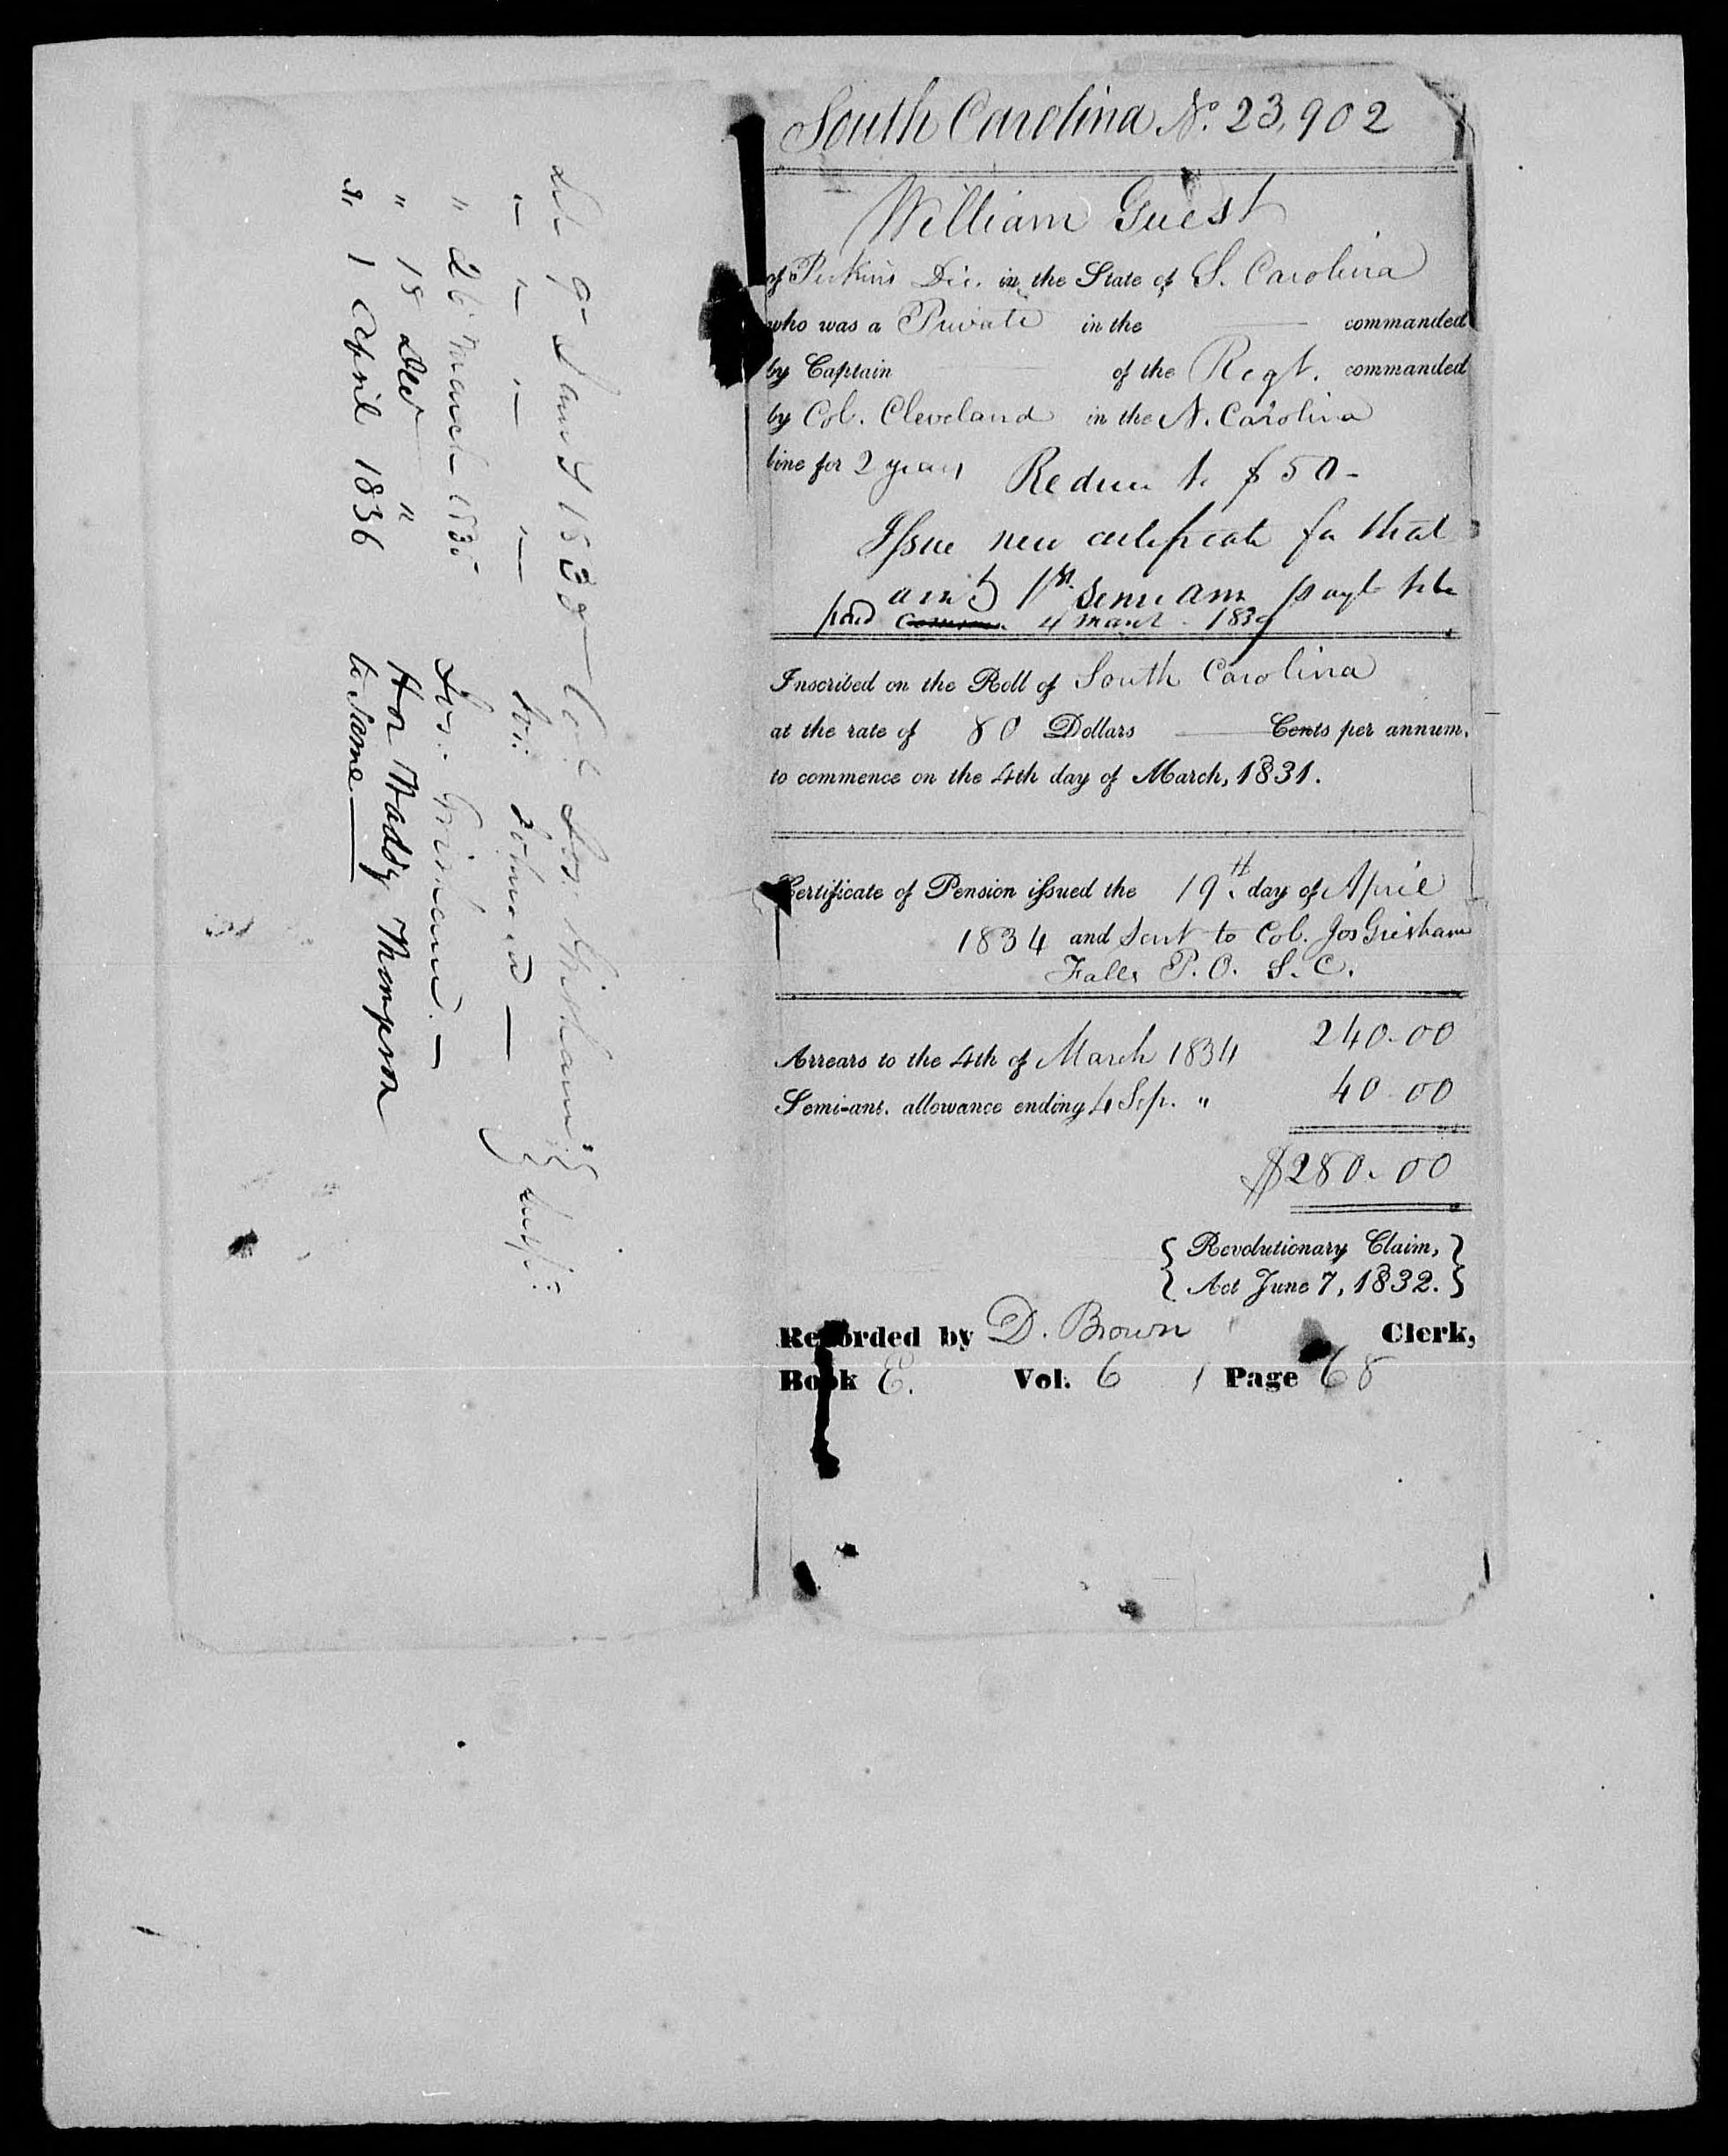 Docket for Pension from the U.S. Pension Office for William Guest, 19 April 1834